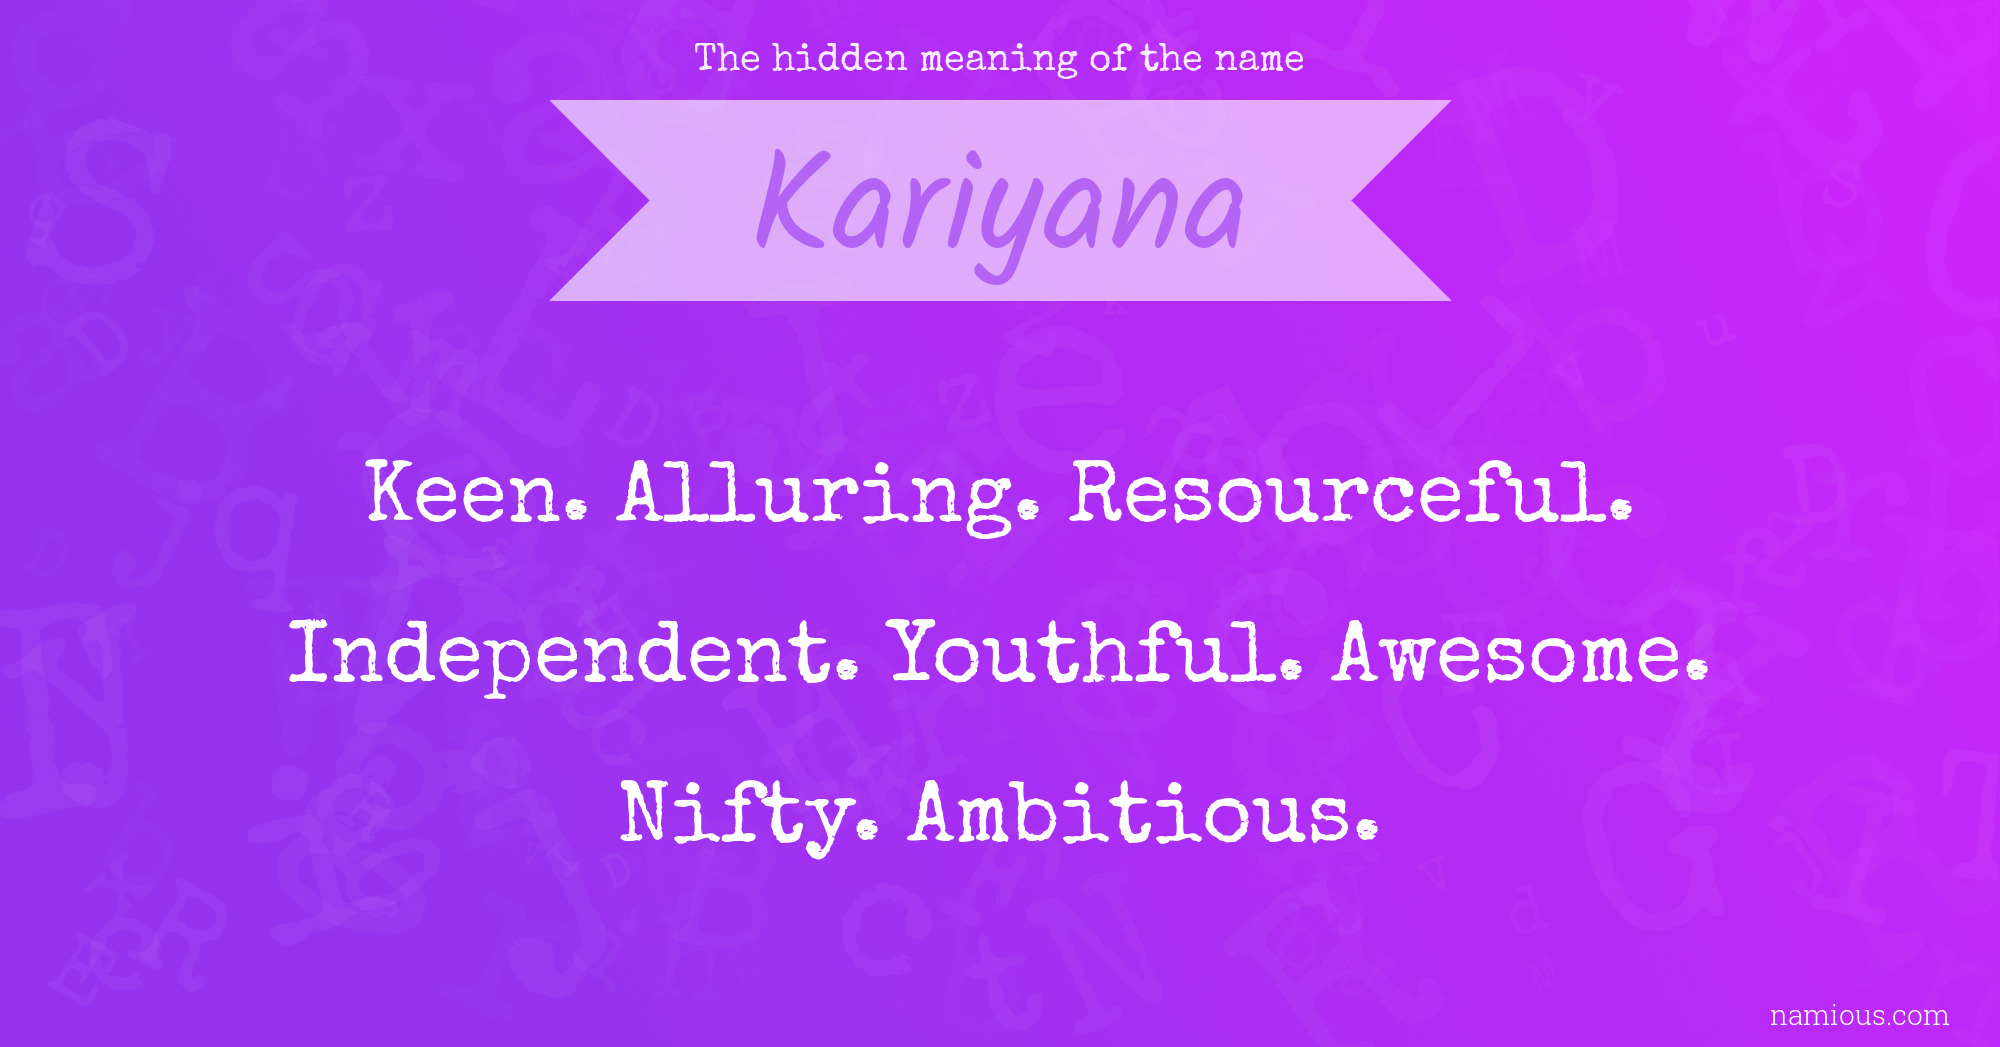 The hidden meaning of the name Kariyana